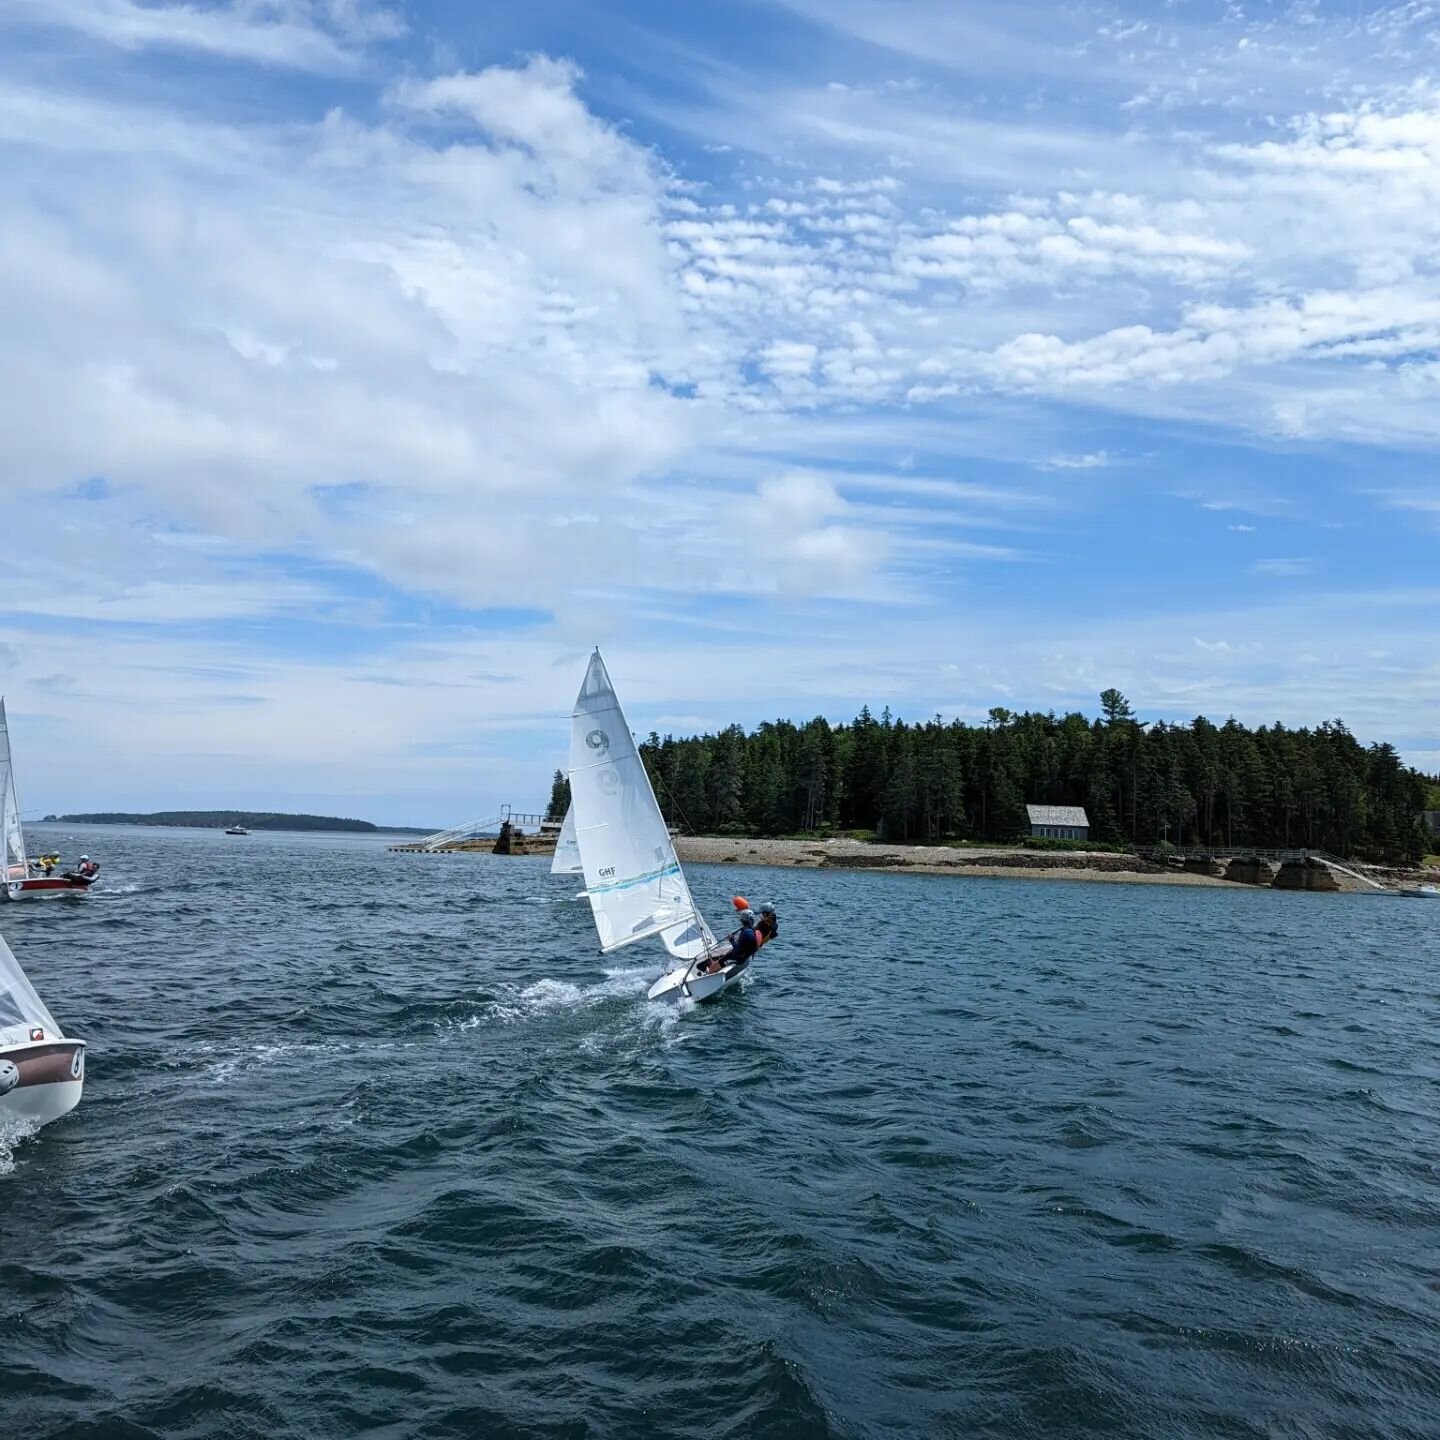 Running the Turbo 420 line for The Junior Hospice Regatta of Maine!  Big thanks to @mdicsc for all the help with hosting, and everyone who joined us on the water!